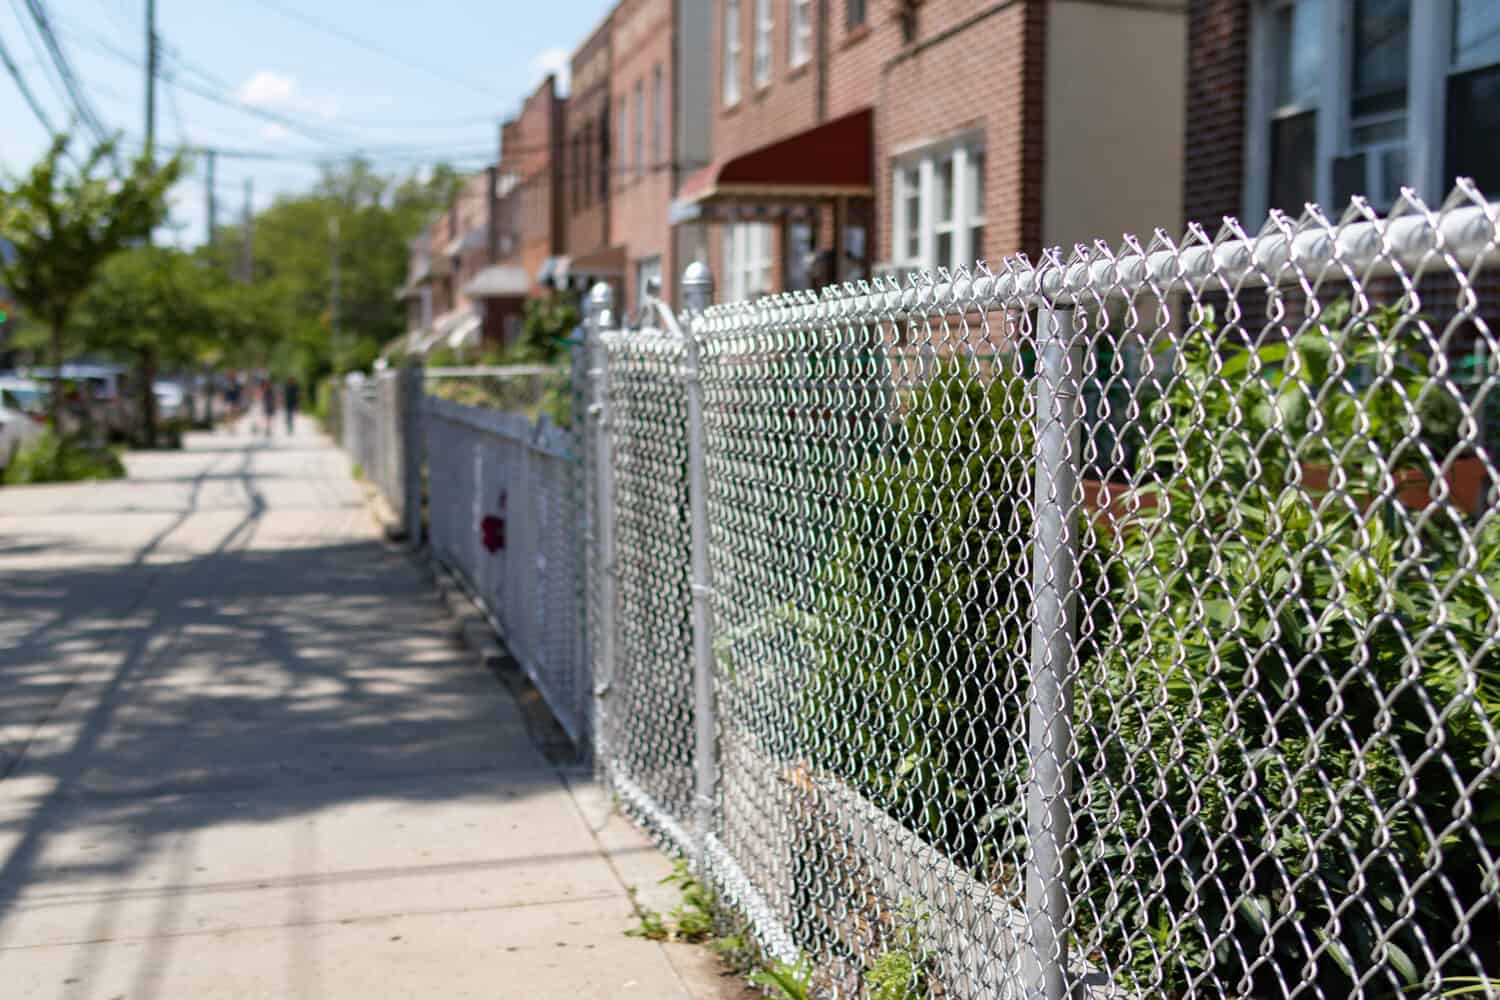 A chain link fence along an empty sidewalk with a row of old brick homes with gardens in Astoria Queens New York.